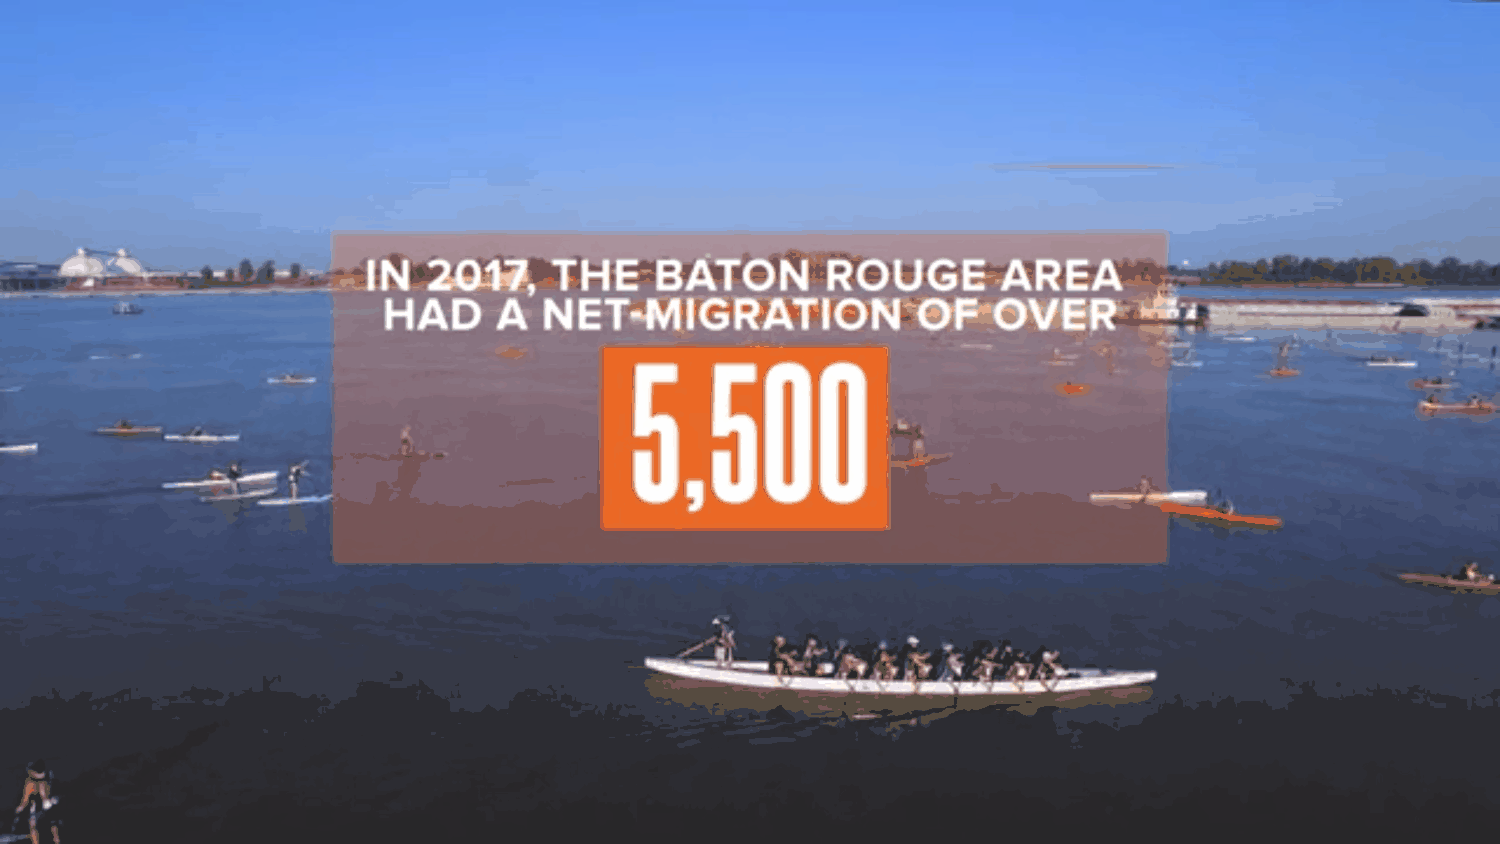 In 2017, The Baton Rouge Area had a Net Migration of over 5,500 millennials